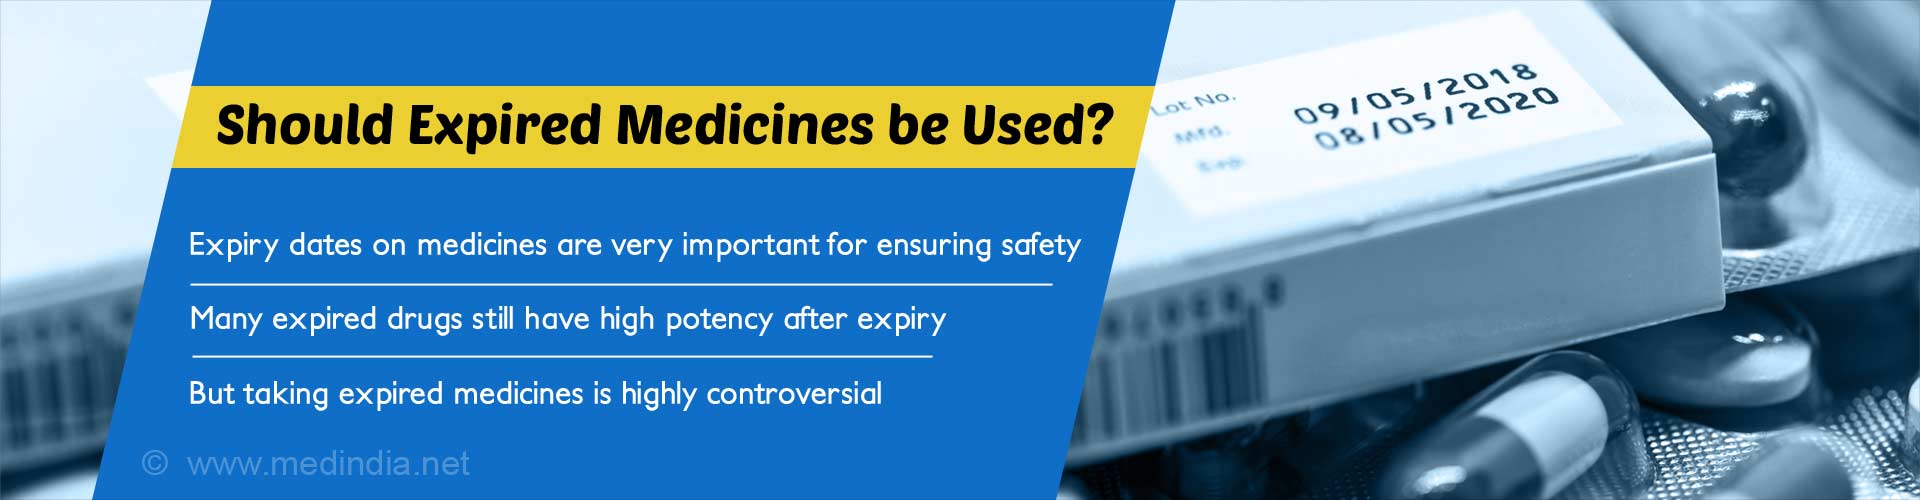 Should expired medicines be used? Expiry dates on medicines are very important for ensuring safety. Many expired drugs still have high potency after the expiry. But taking expired medicines is highly controversial.